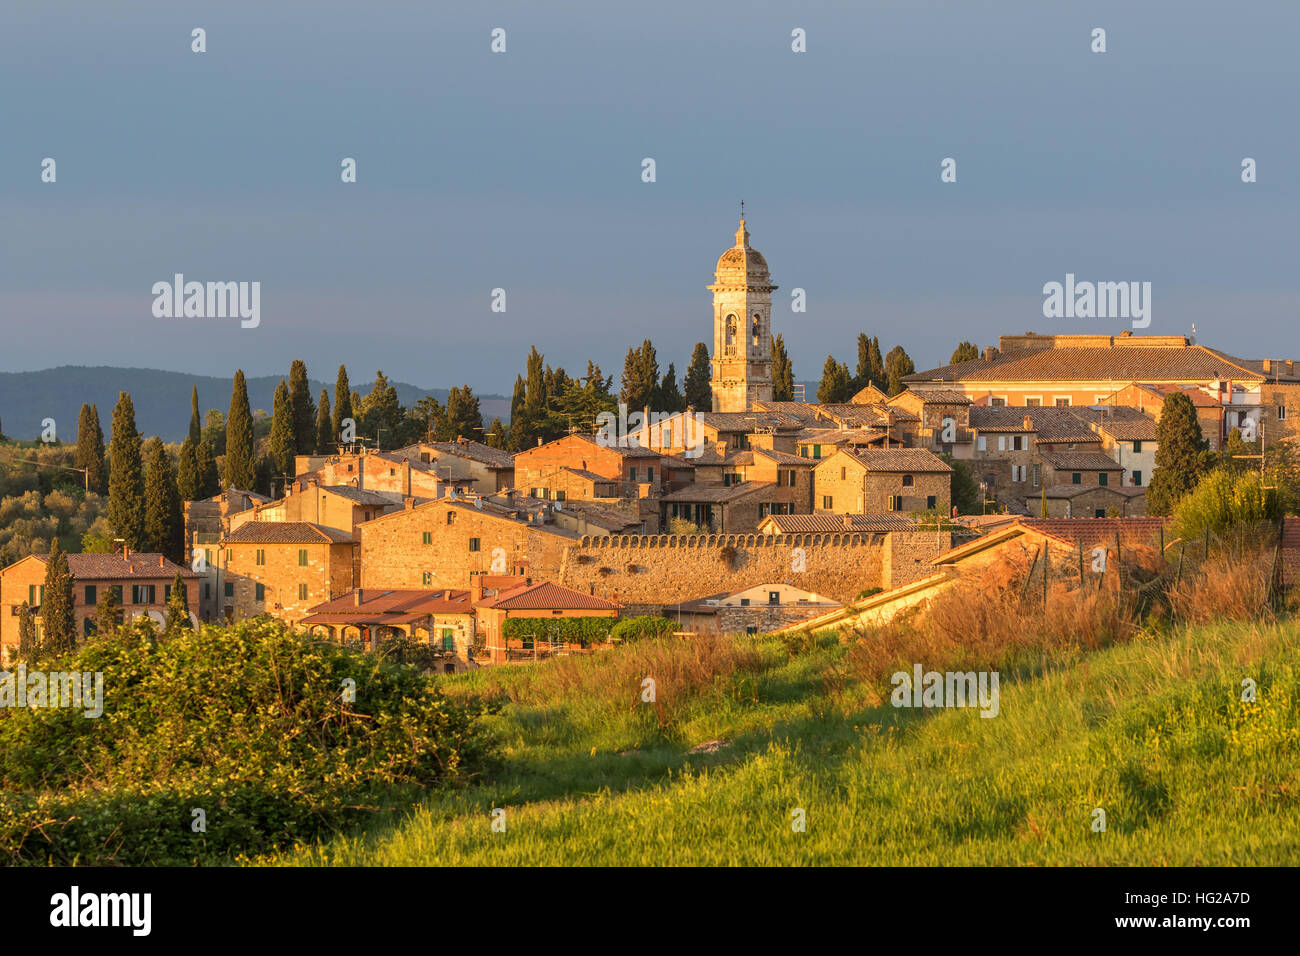 View at San Quirico d'Orcia an Italian village in Tuscany, Italy Stock Photo